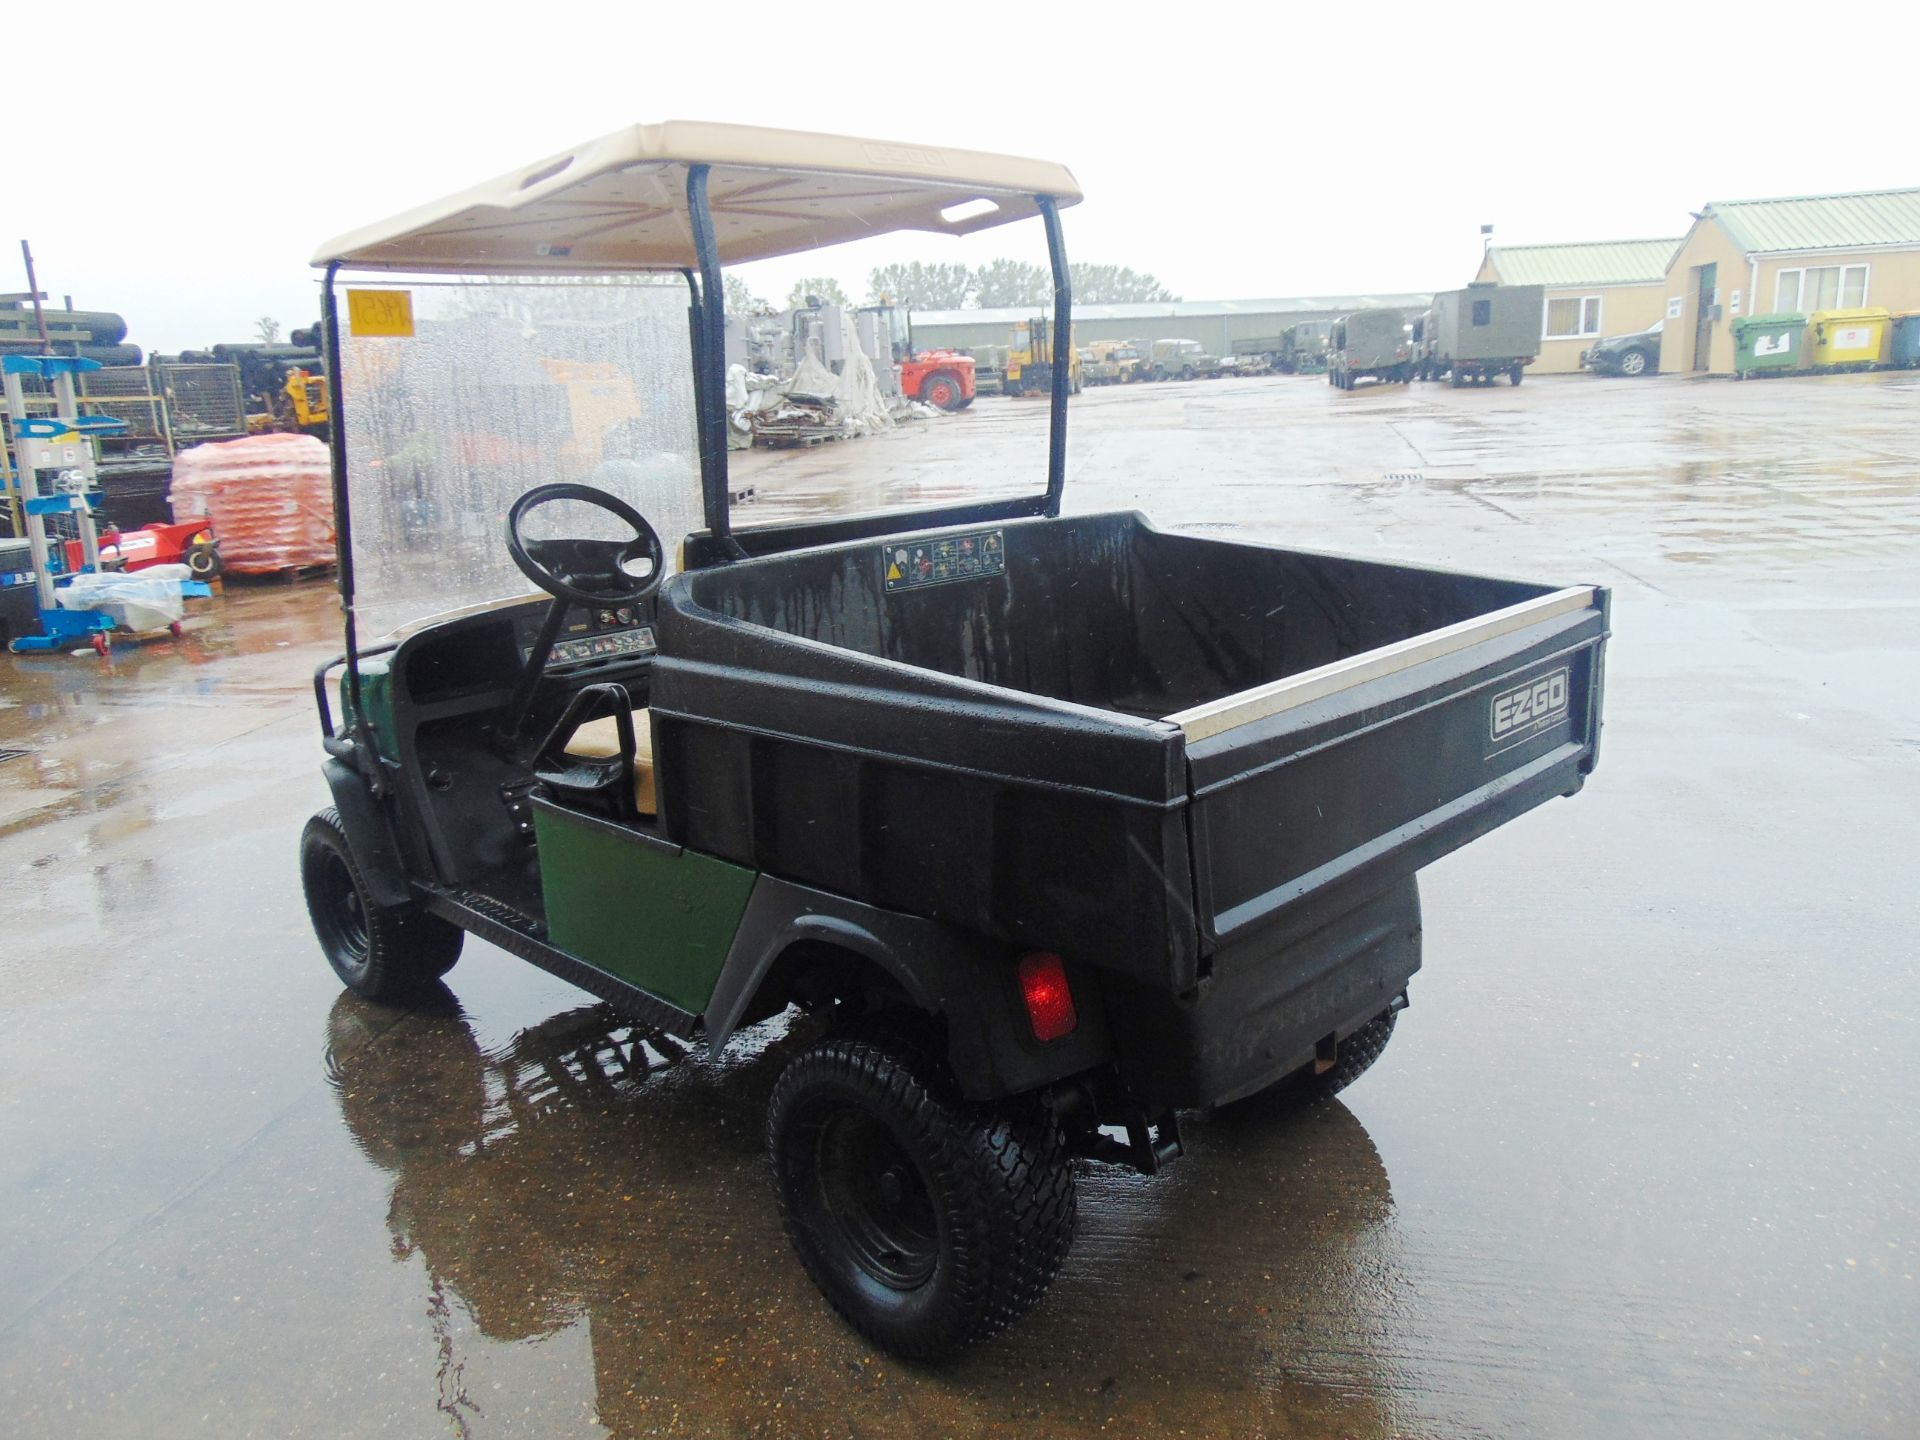 E-Z-GO Lifted Estate/Grounds Vehicle c/w Tipping Rear Body Only 889 Hours! - Image 8 of 21